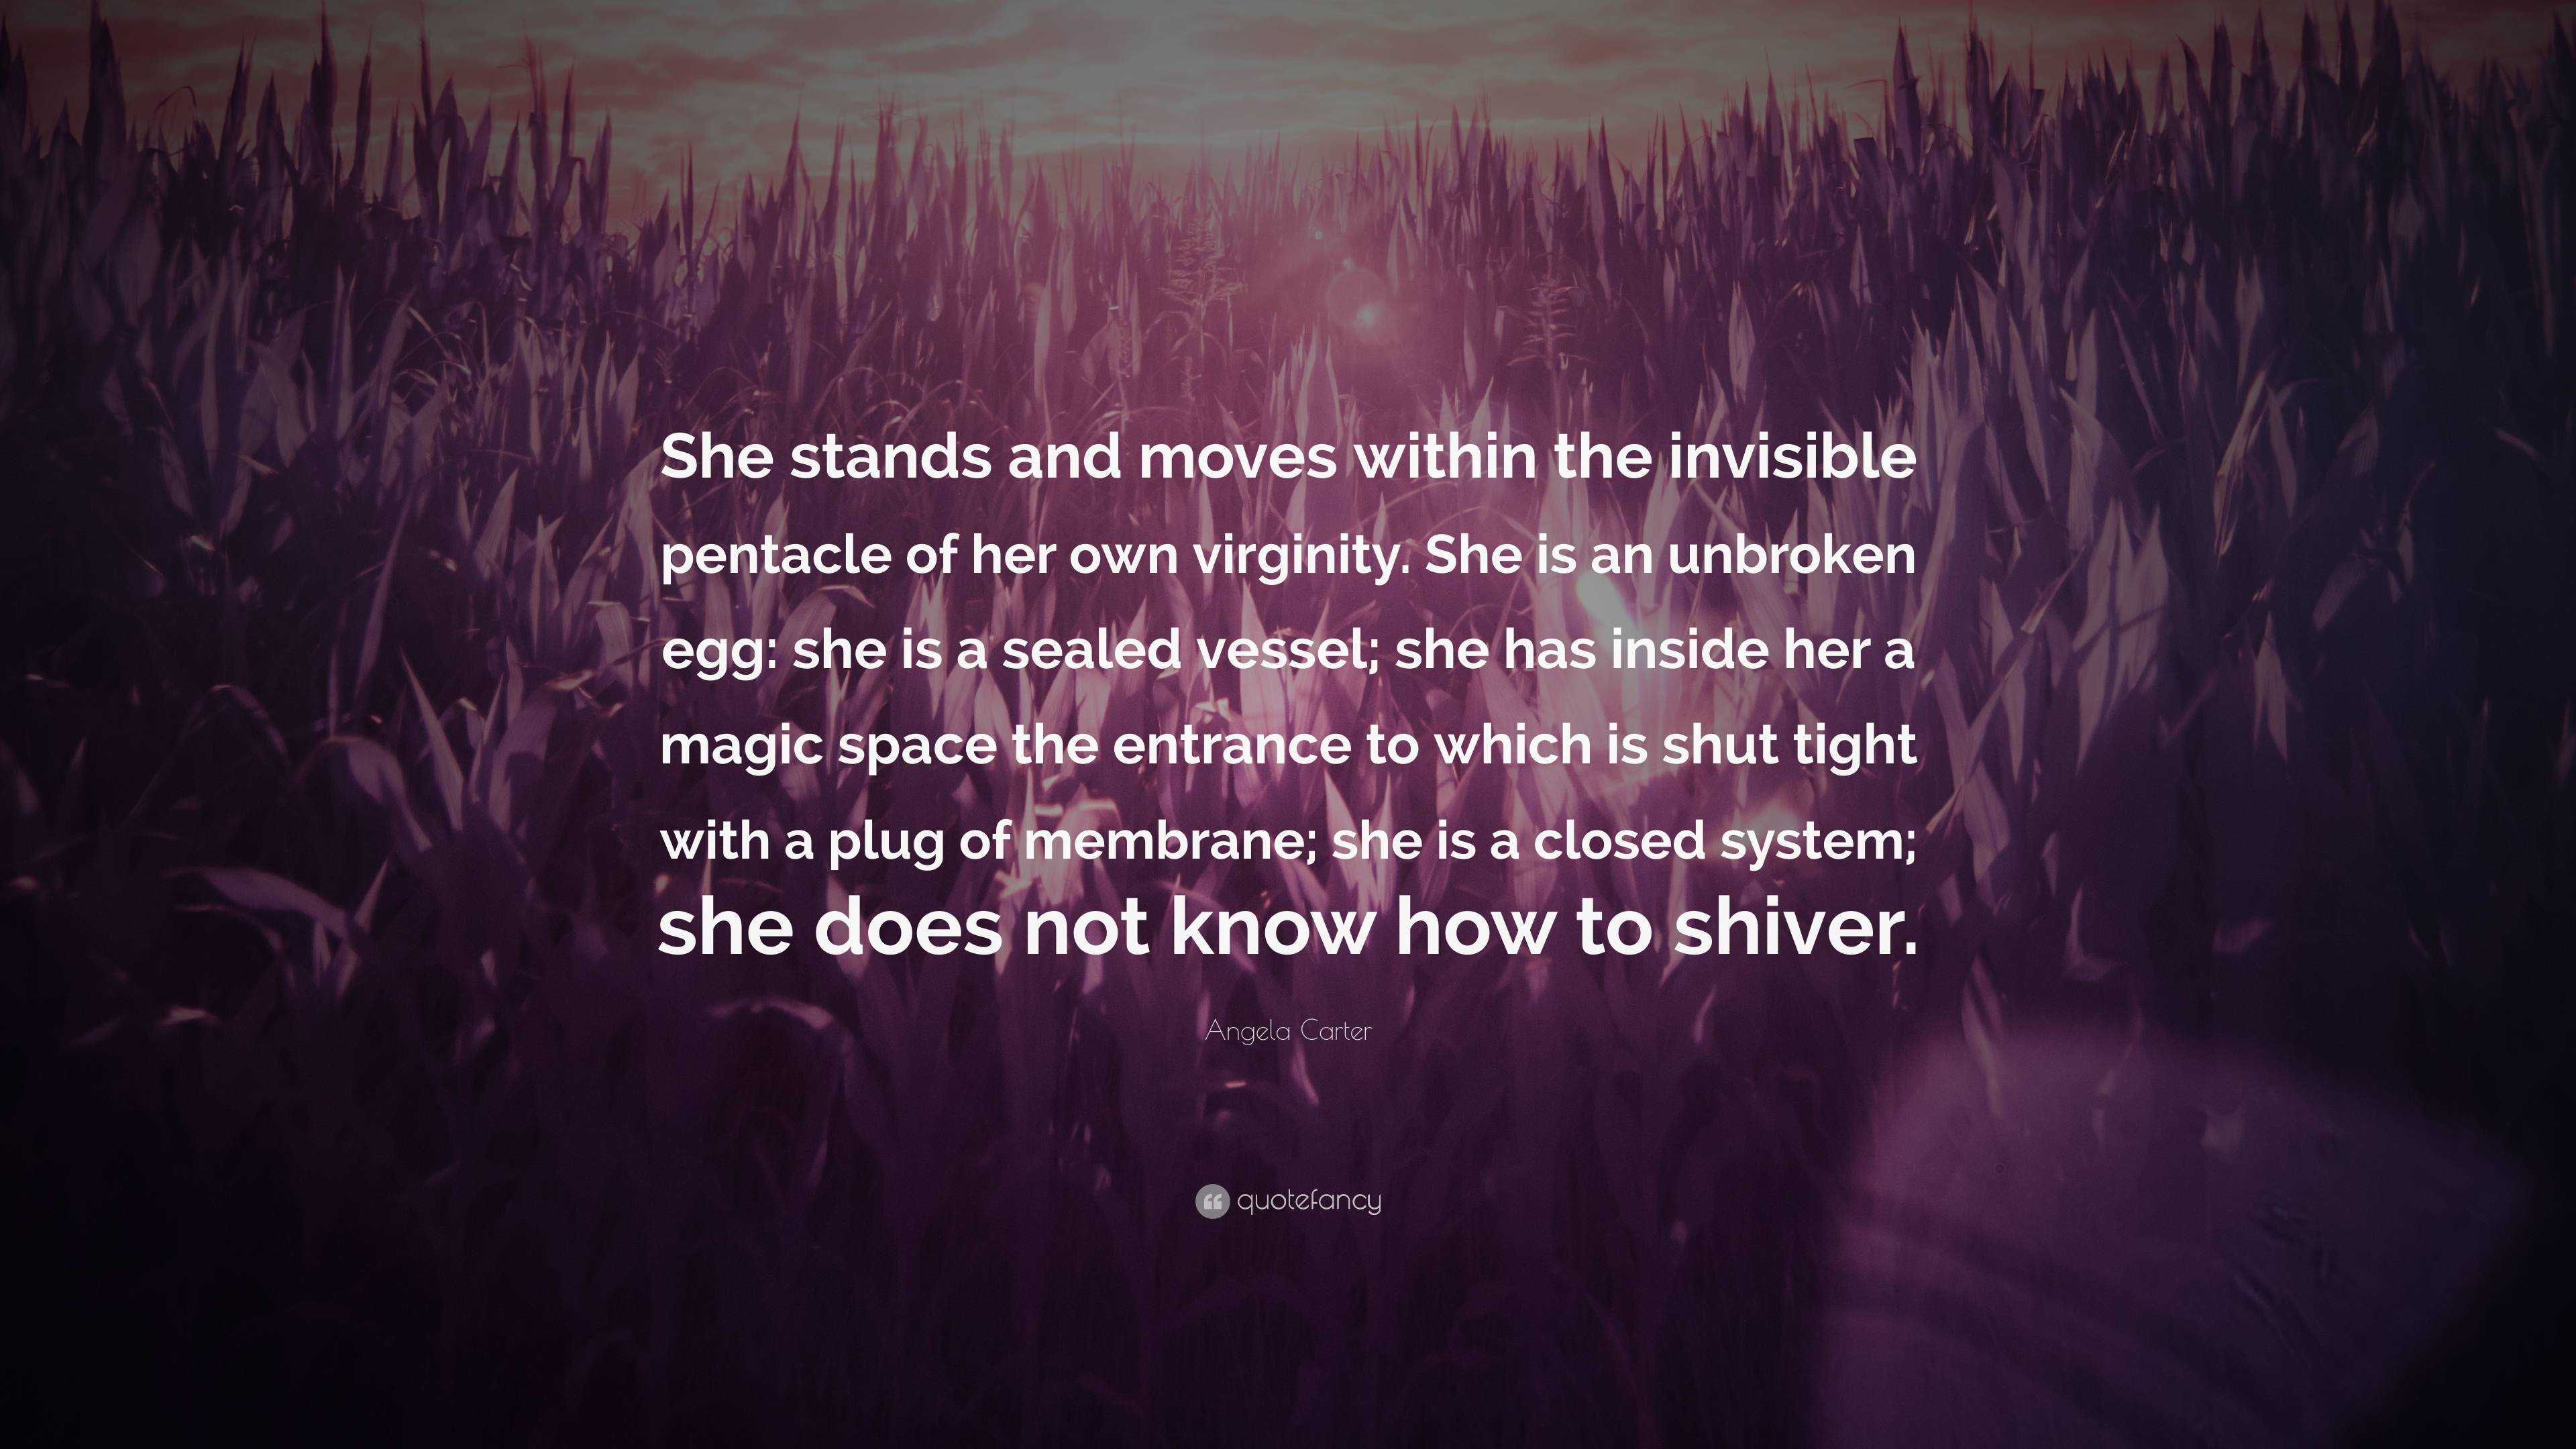 Angela Carter Quote: "She stands and moves within the invisible pentacle of her own virginity ...